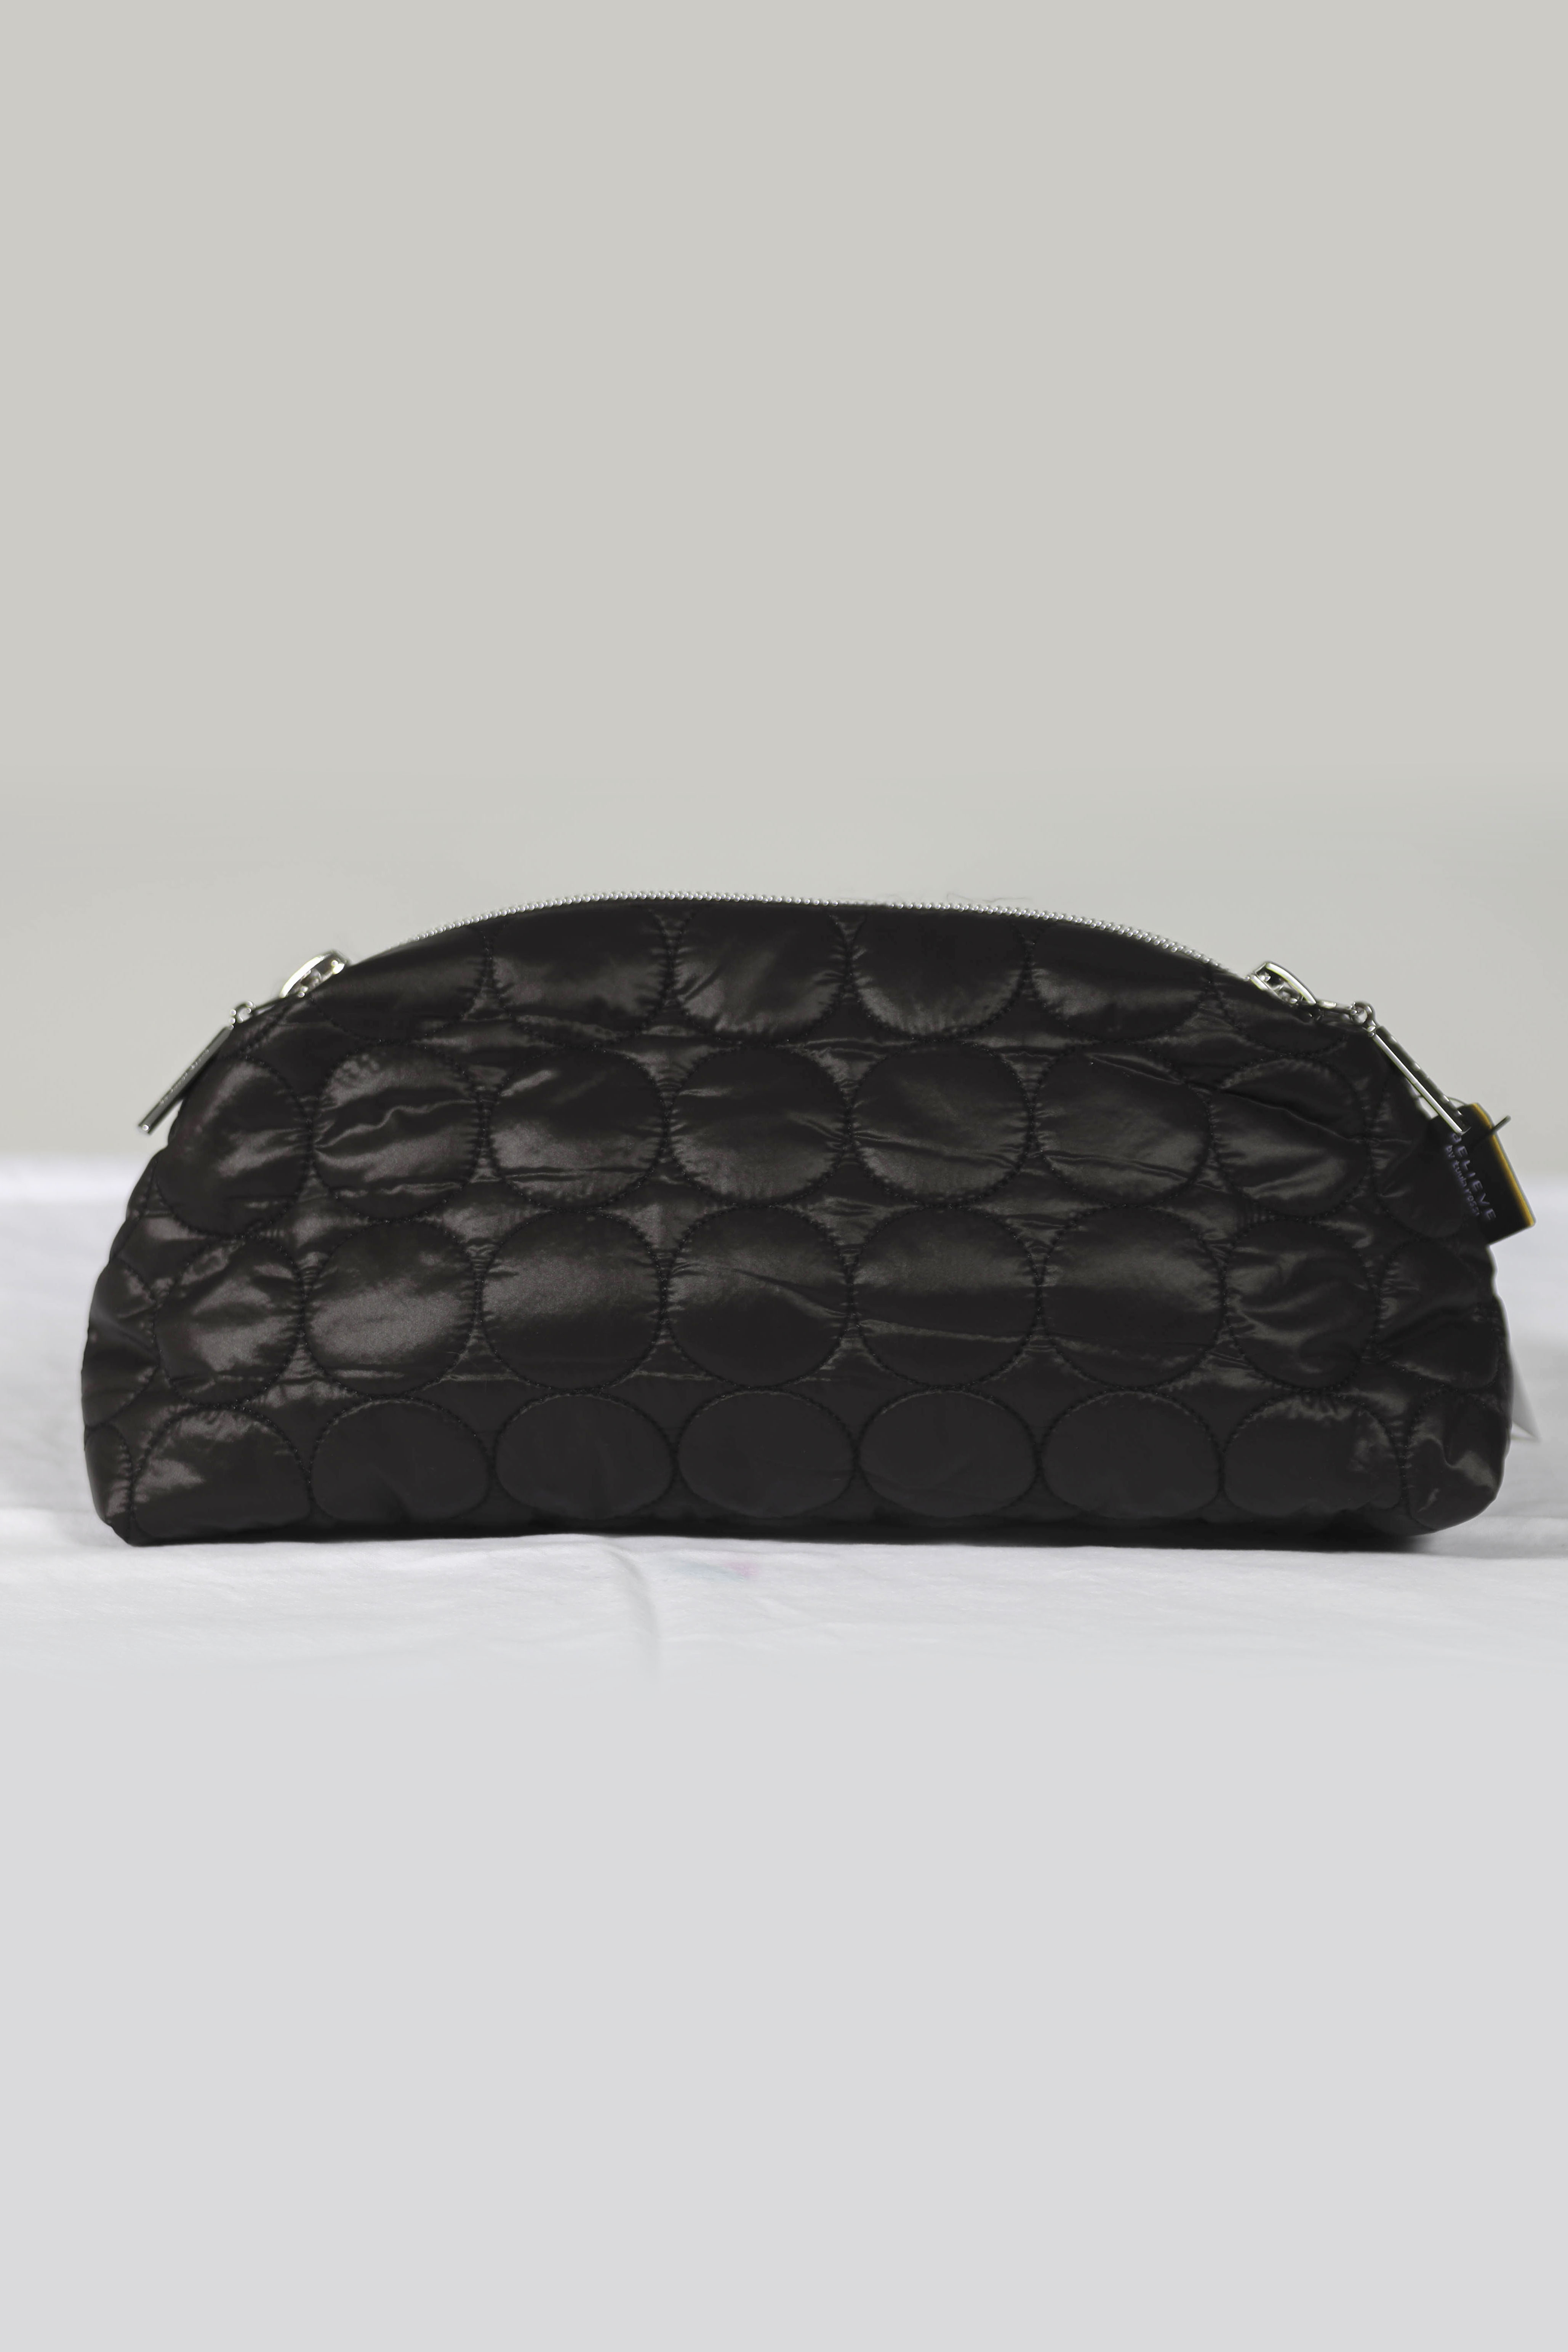 Small Bag, Black Ball – BELIEVE by tuula rossi